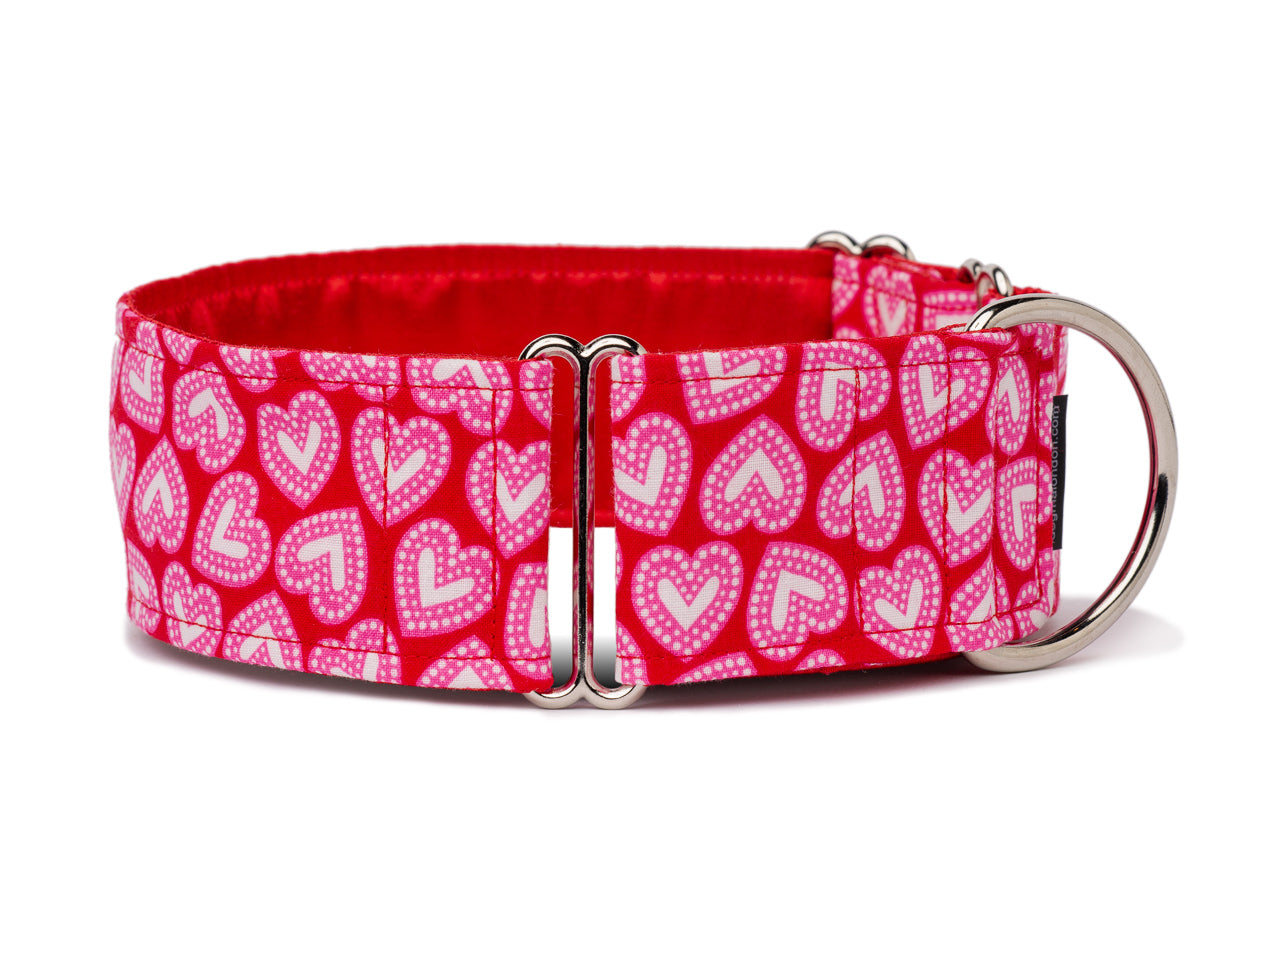 Pretty pink and white hearts on red are perfect for Valentine's Day or any time you want to show your pooch some love!